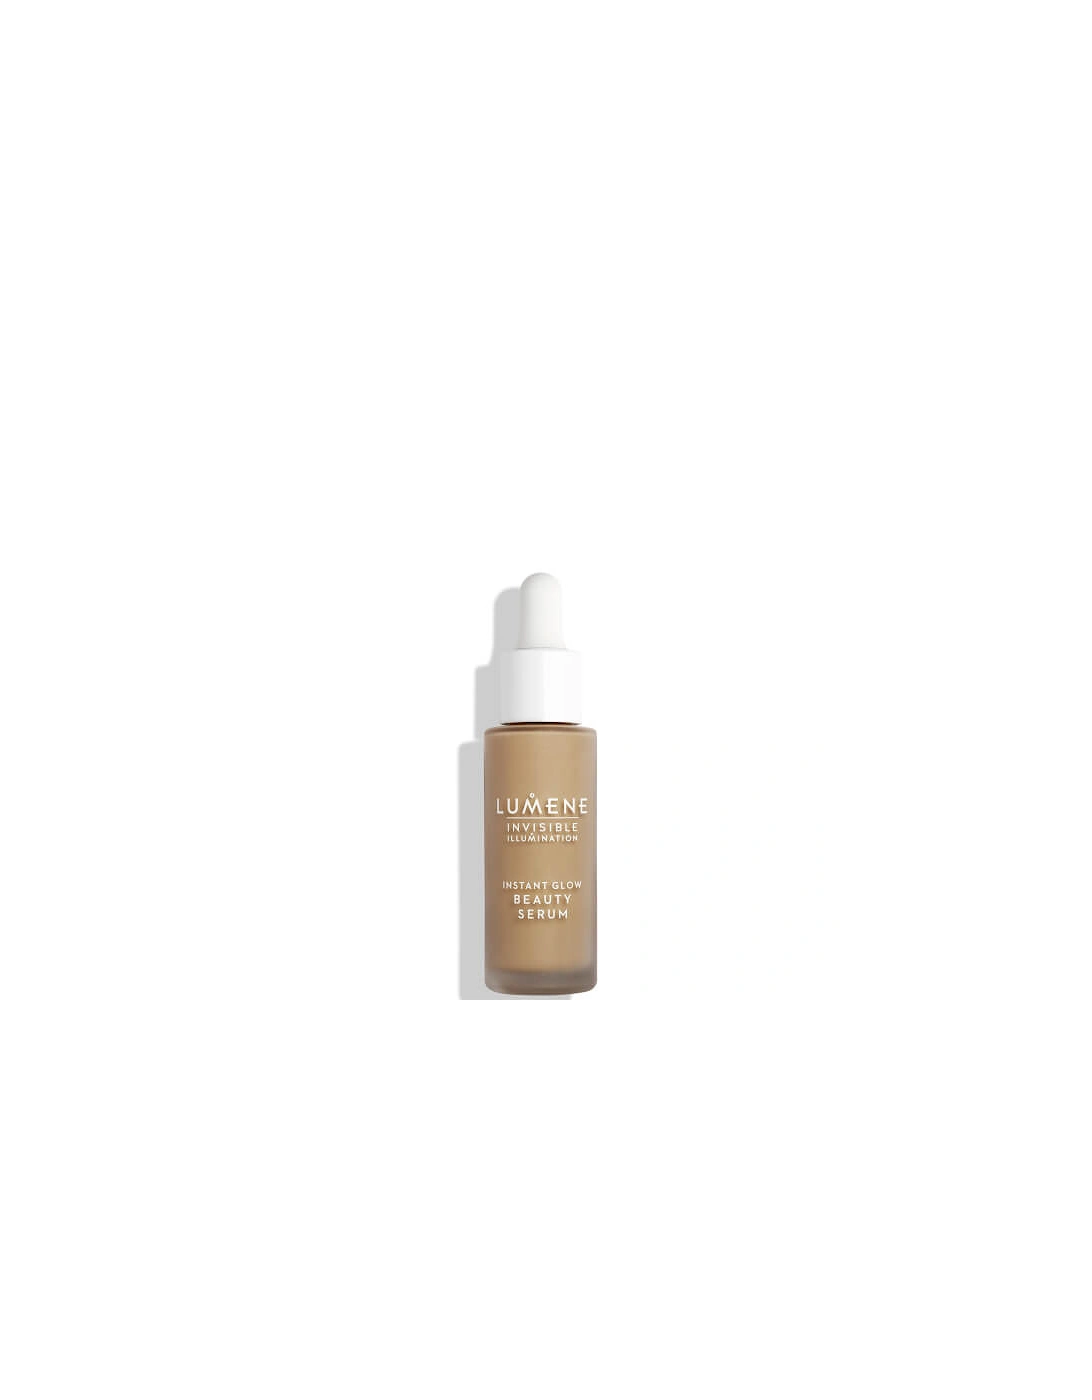 Invisible Illumination Instant Glow Beauty Serum - Universal Tan - - Invisible Illumination Instant Glow Beauty Serum - Universal Tan - Invisible Illumination Instant Glow Beauty Serum - Universal Bronze - Invisible Illumination Instant Glow Beauty Serum - Universal Deep, 2 of 1